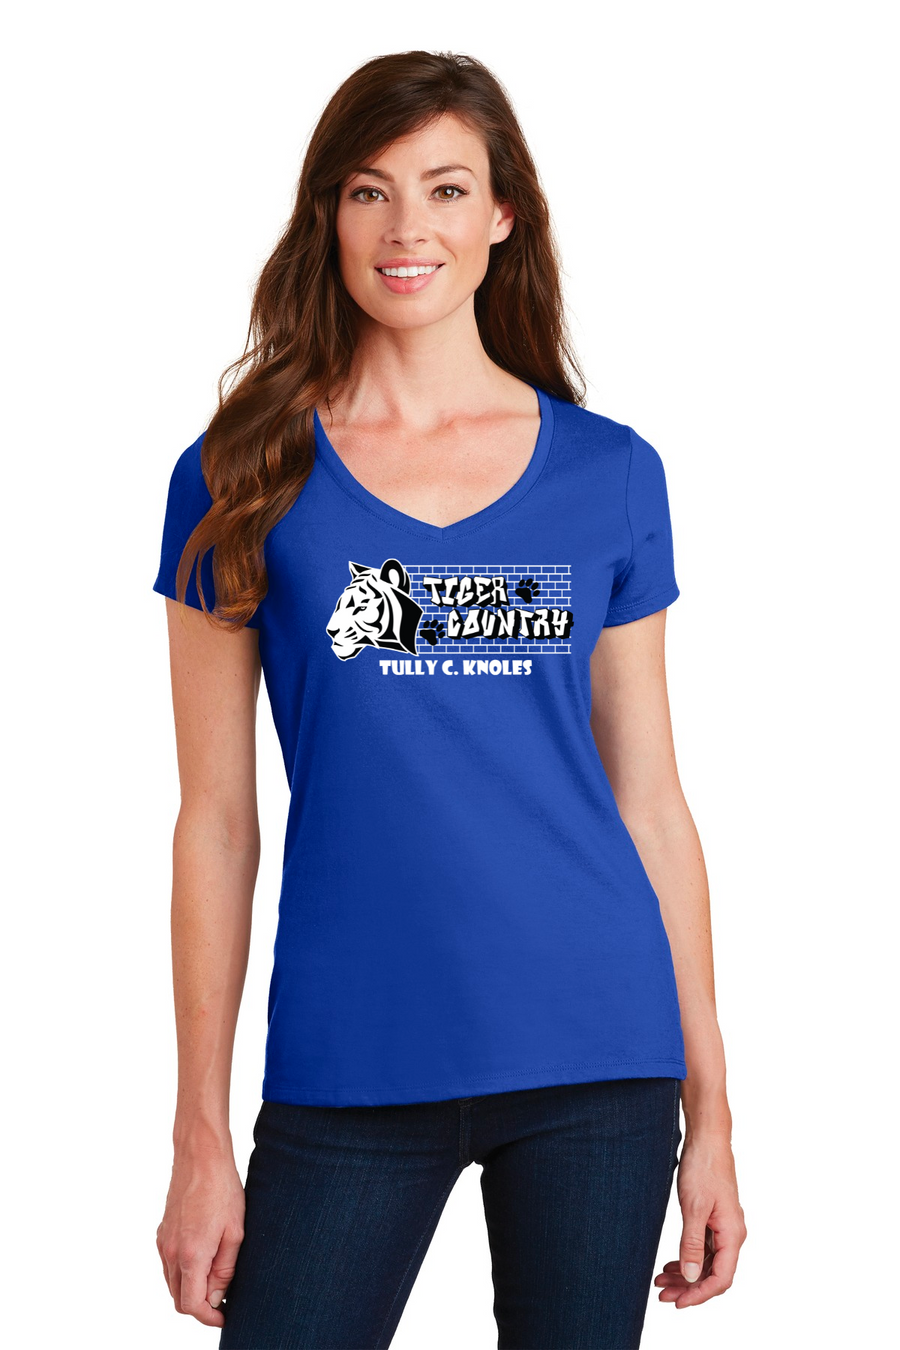 Tully C Knoles - Spirit Wear 23/24 On-Demand-Port and Co Ladies V-Neck Tiger Country Logo